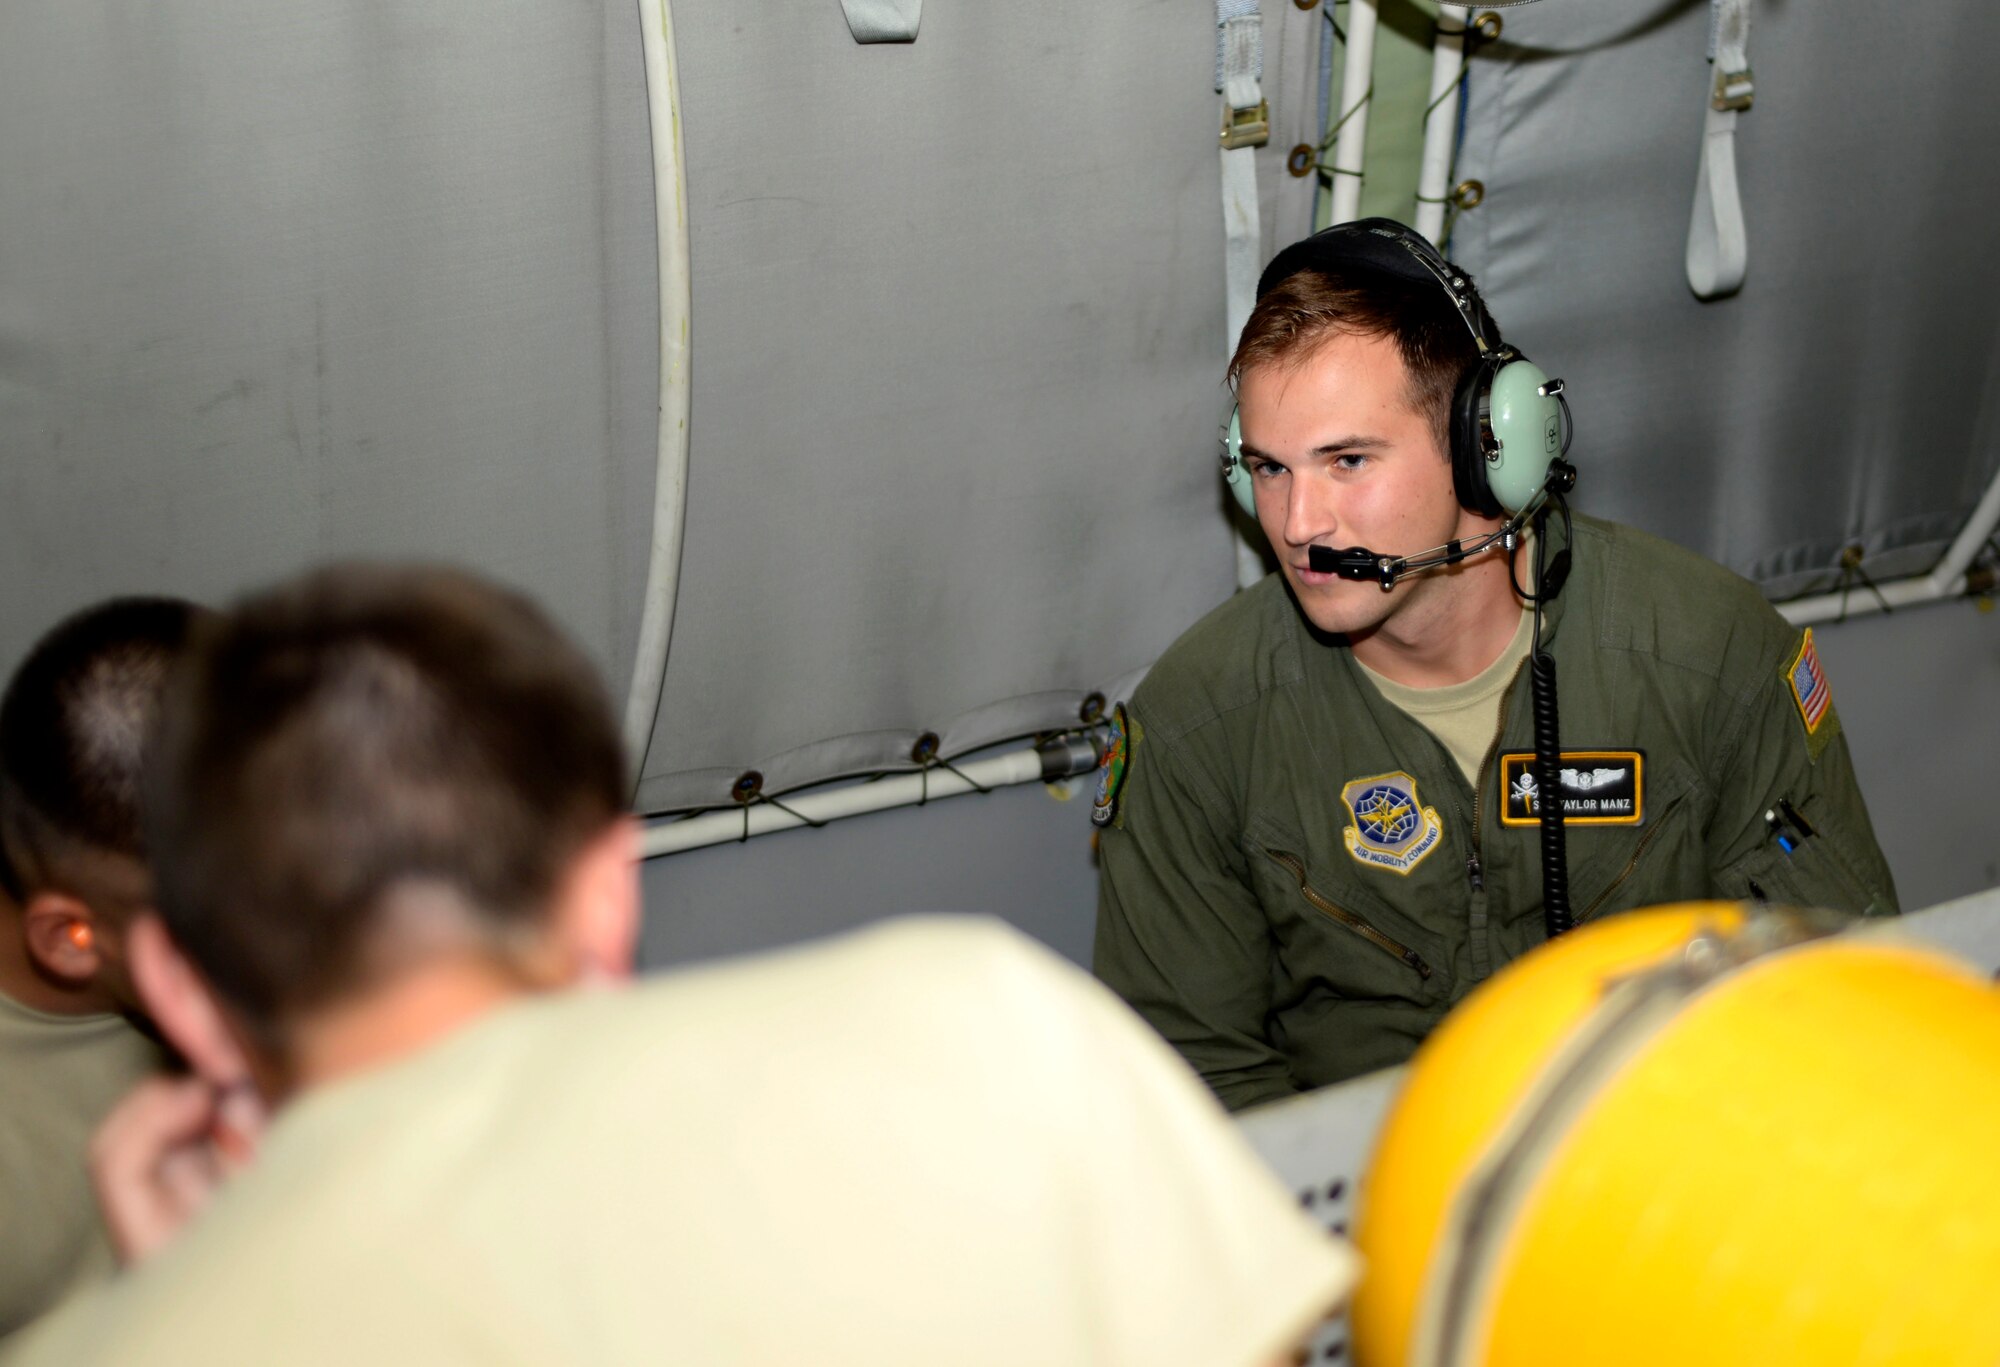 Senior Airman Taylor Manz, a Boom Operator assigned to the 91st Air Refueling Squadron explains some of the tasks expected of him as a boom operator July 18, 2016. Some of the tasks expected of a boom operator include in-flight refueling, supervising cargo and passenger loading and off-loading operations, and performing jumpmaster duties when necessary. (U.S. Air Force photo by Airman 1st class Rito Smith)